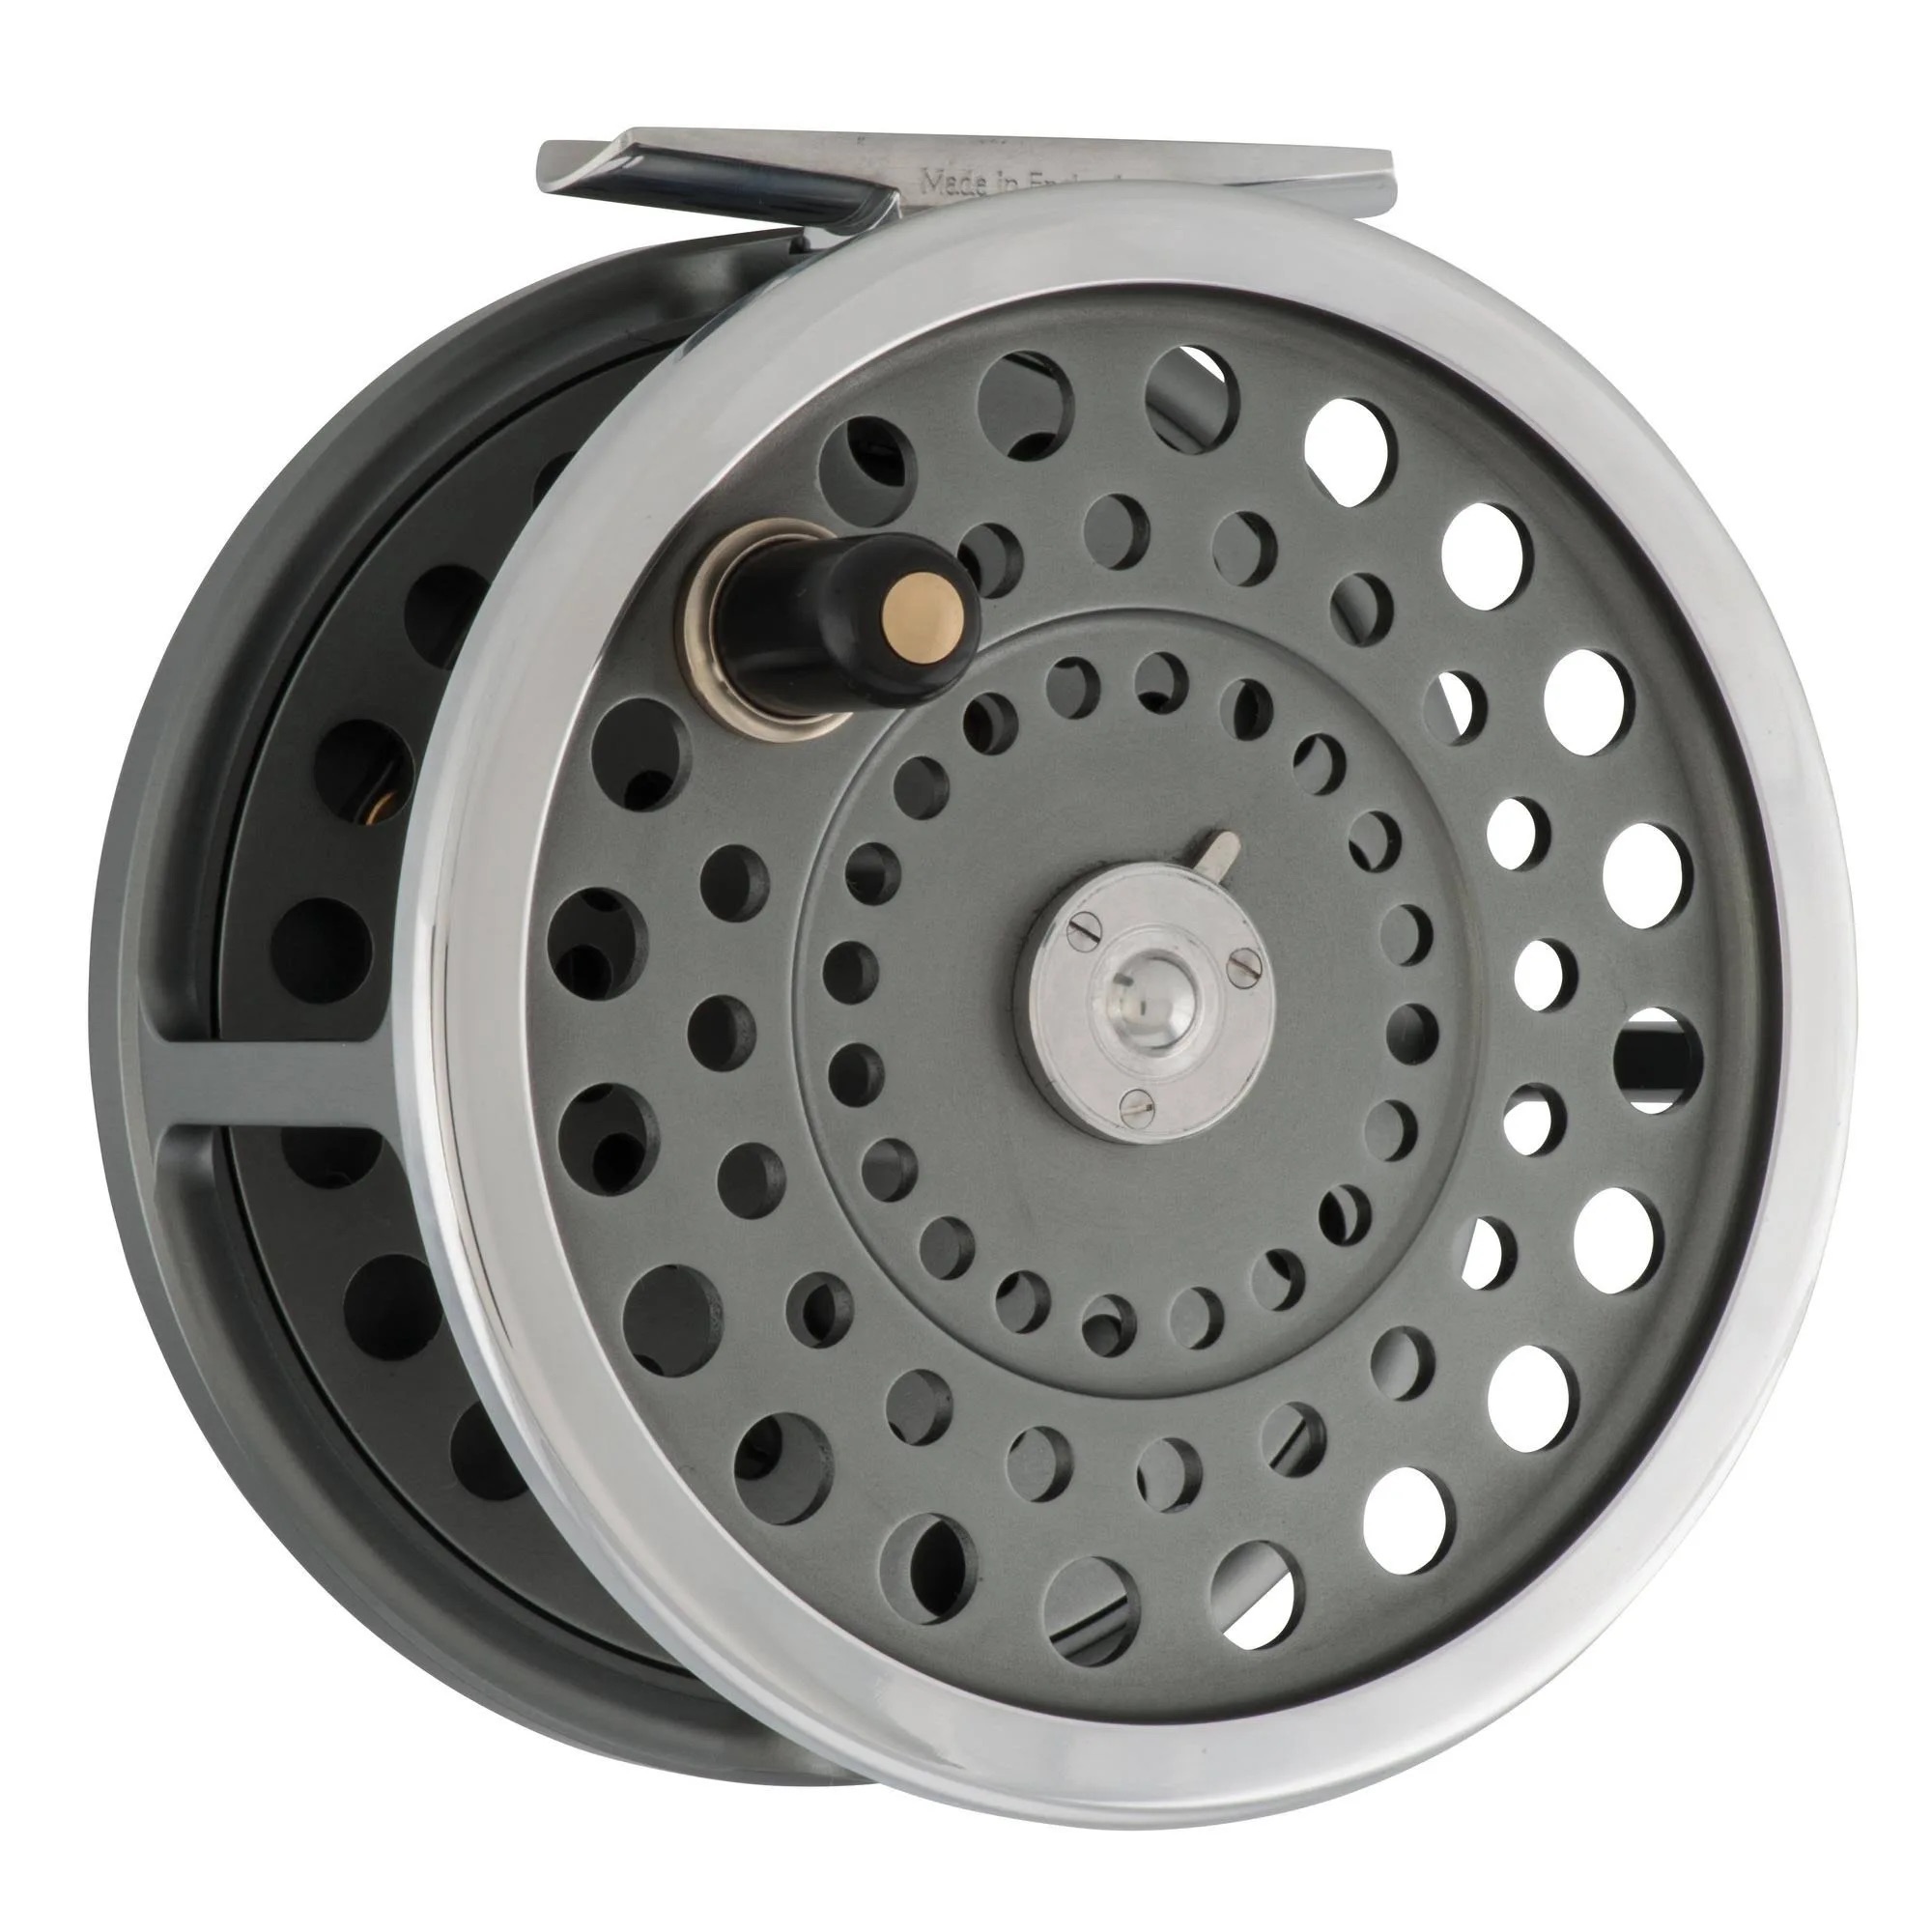 Hardy Marquis Salmon 2 Fly Reel